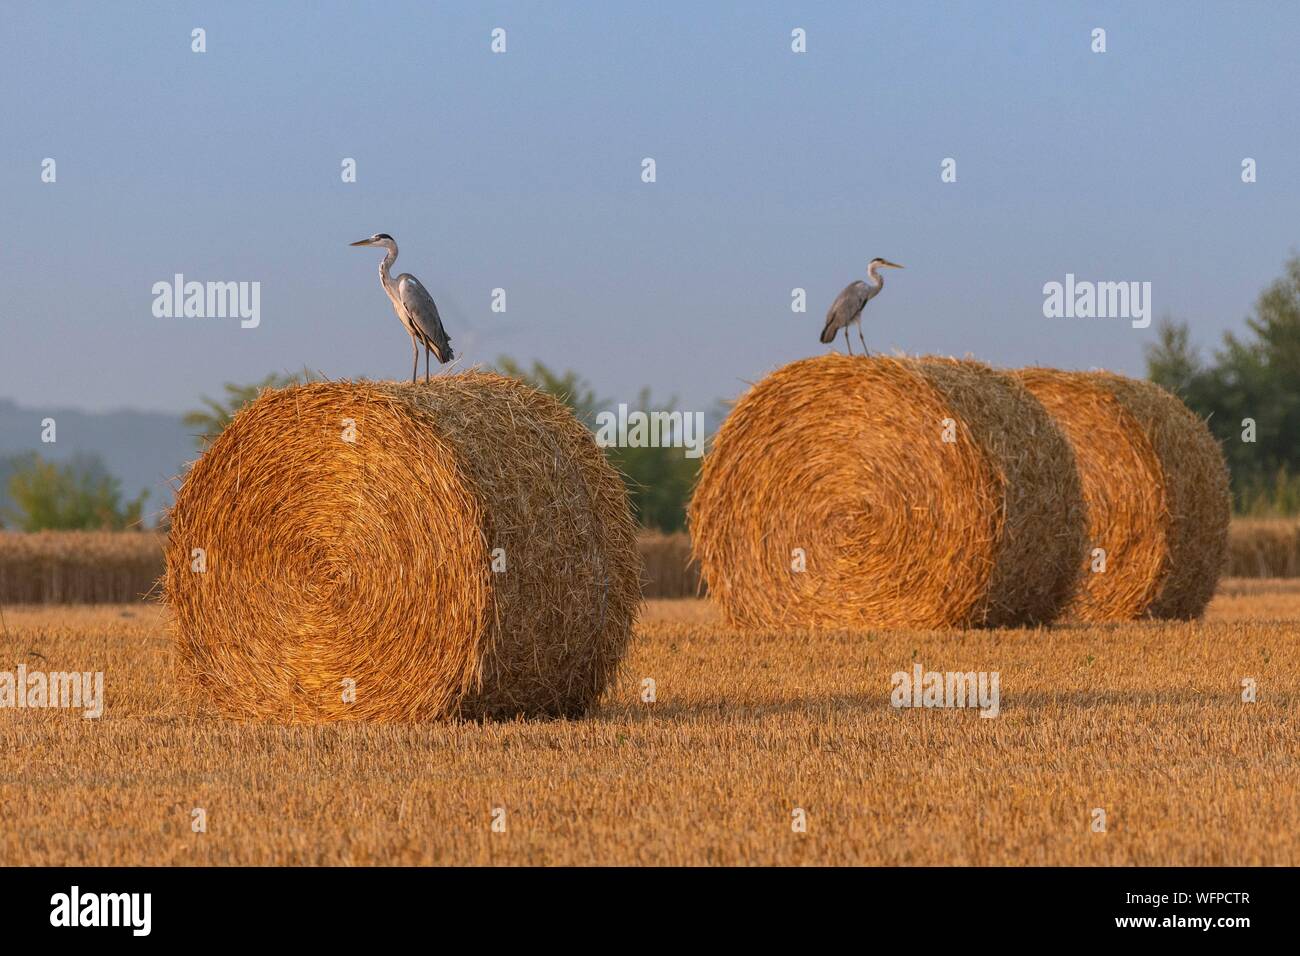 France, Somme, Somme Bay, Saint Valery sur Somme, Gray Herons (Ardea cinerea Gray Heron) perched on the straw mills at the harvest Stock Photo